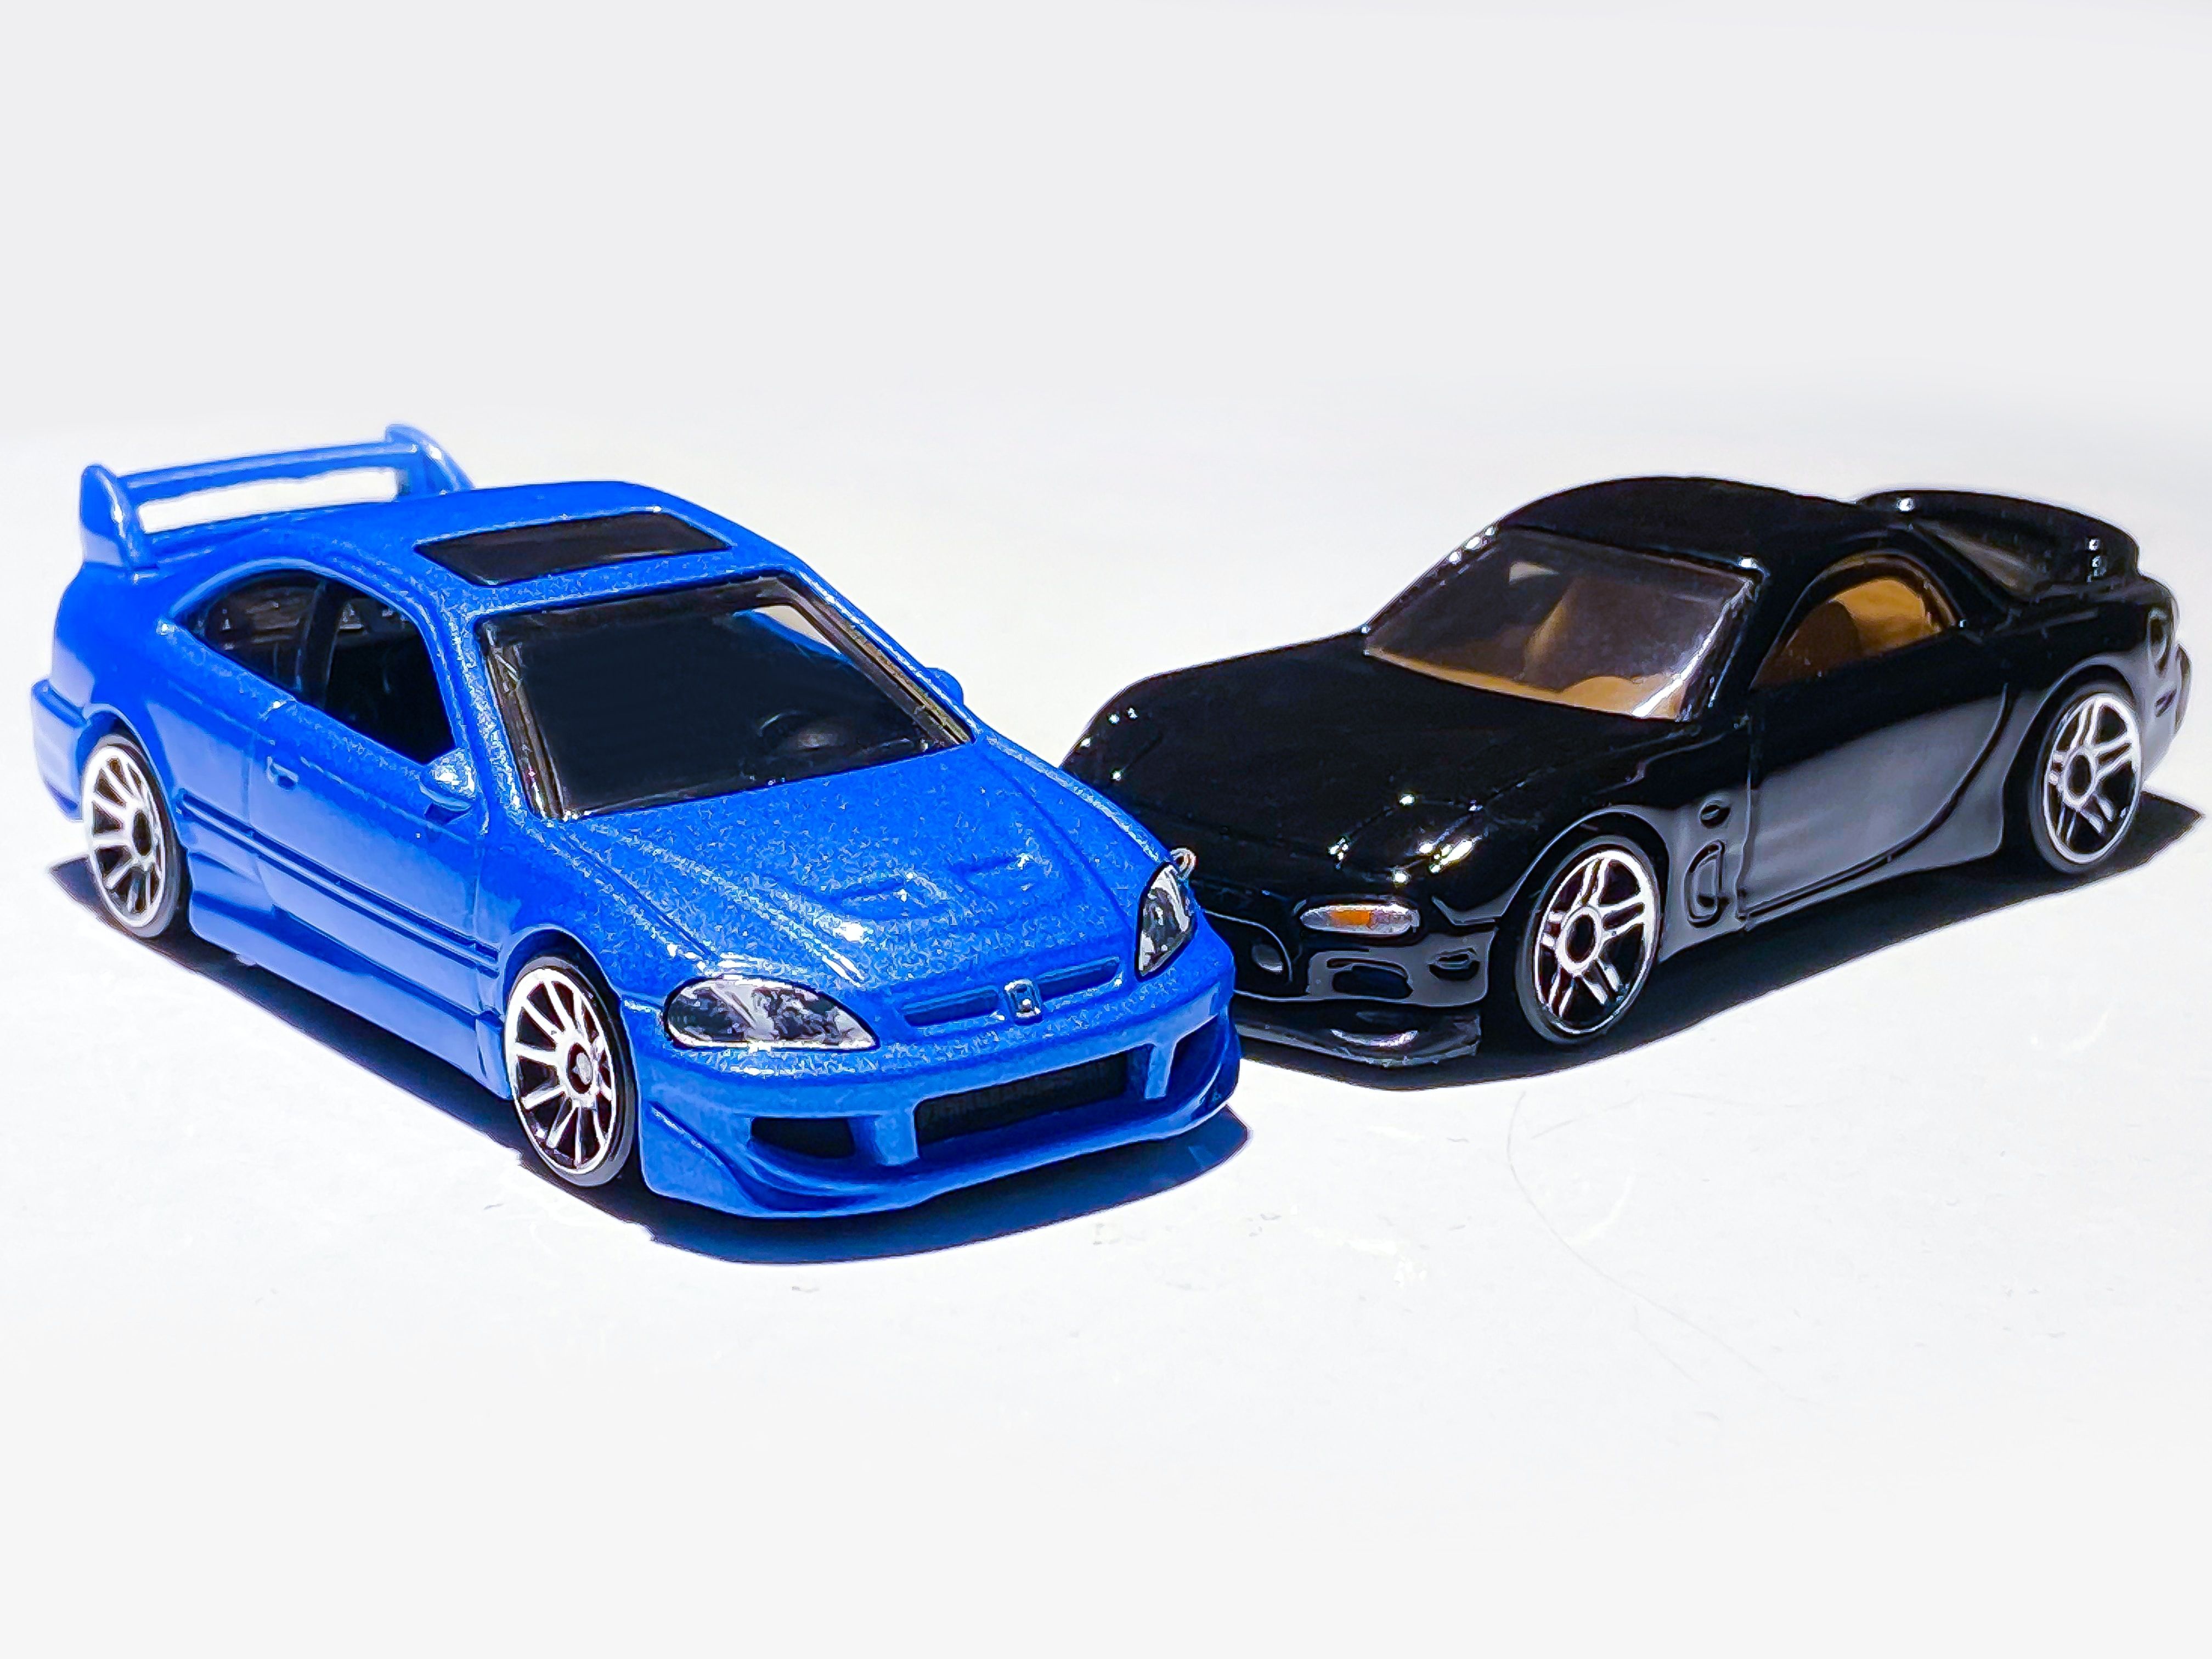 Blue and Black Hot Wheels